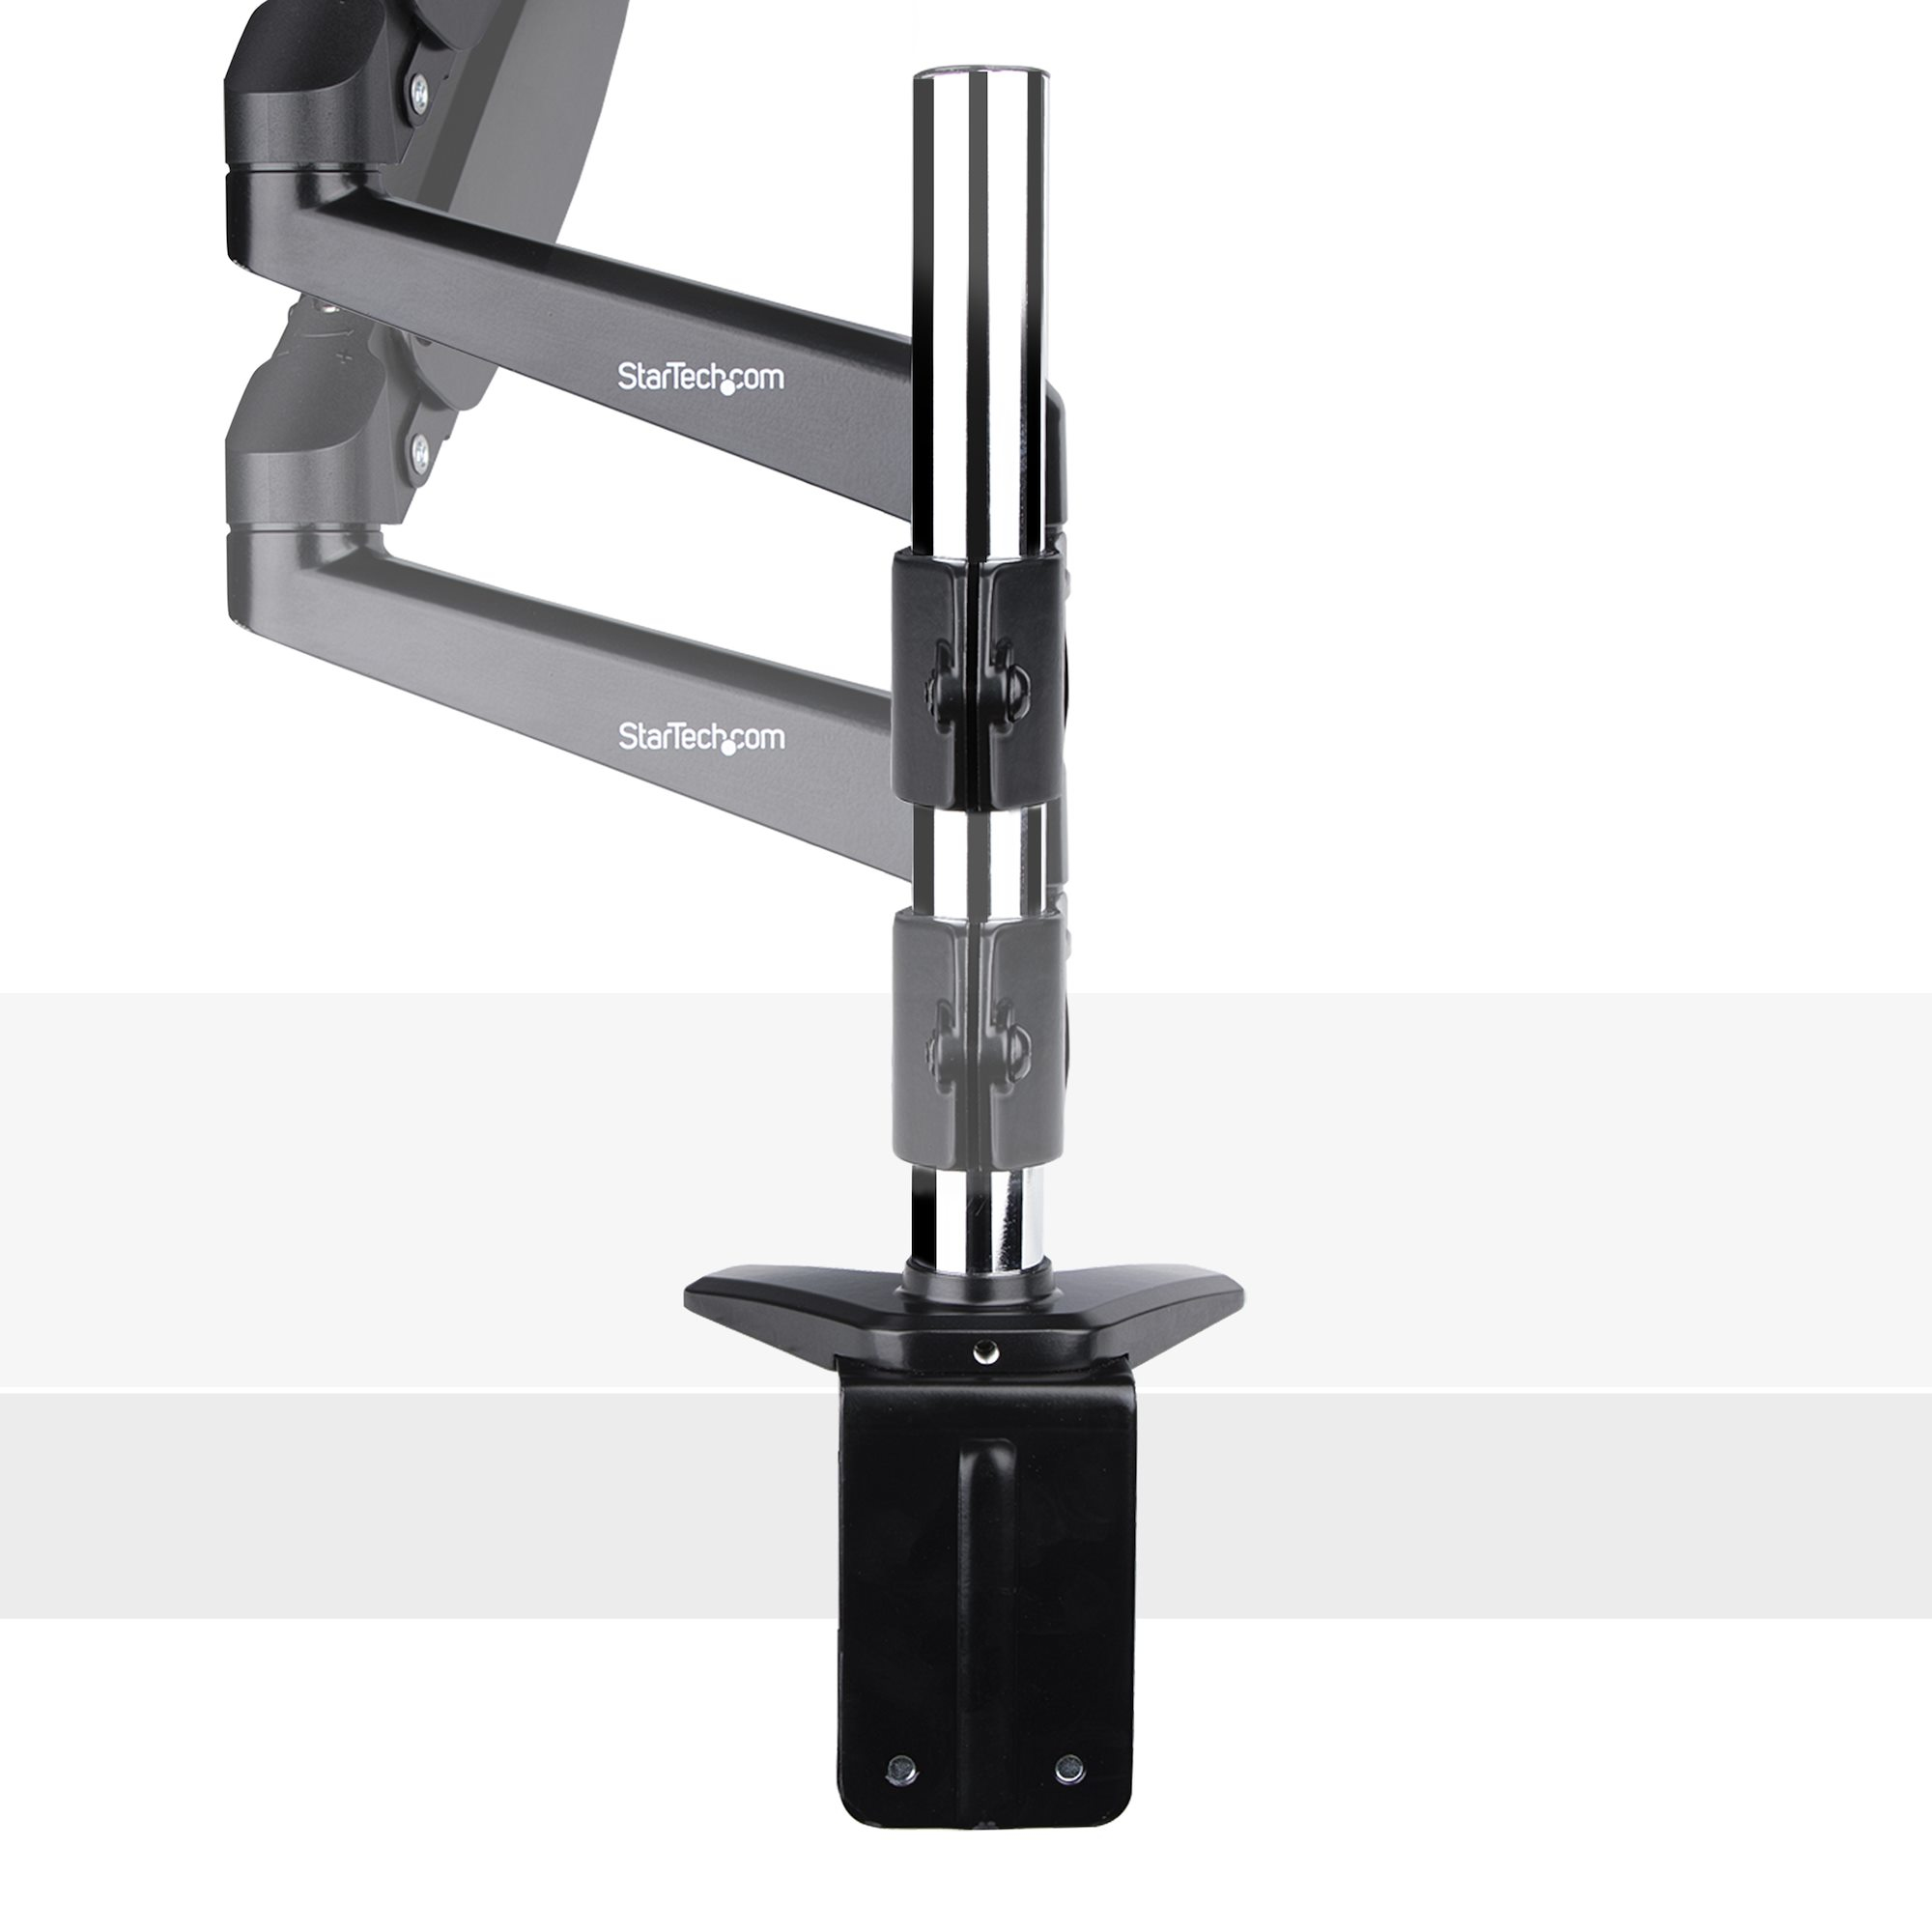 StarTech.com Desk Mount Dual Monitor Arm - up to 32 Displays